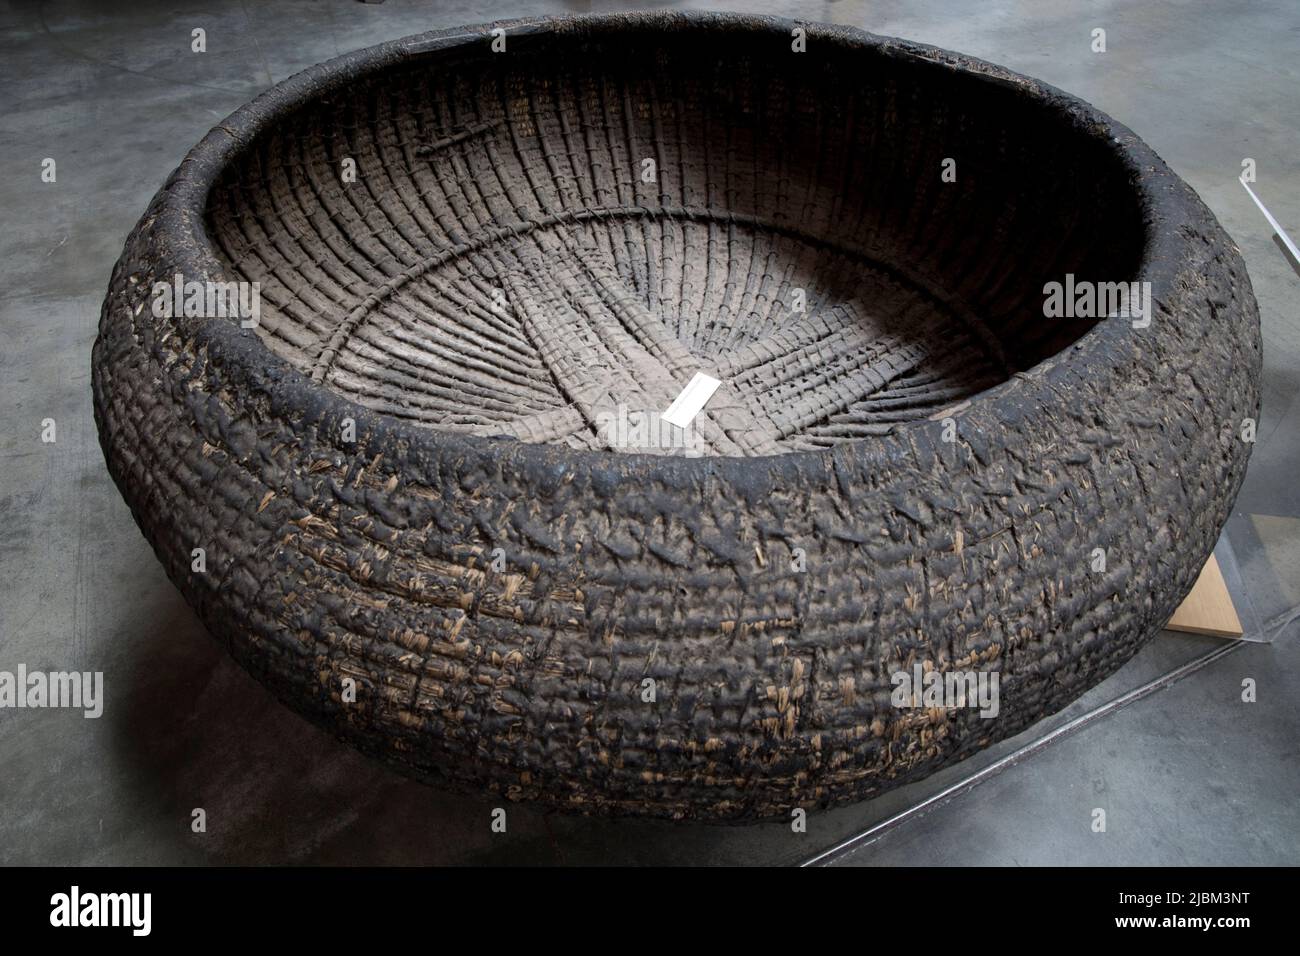 Guffa traditional Arab basket-like boat ucomprising a wooden frame with woven reeds used to ferry people and cargo along rivers Iraq Stock Photo